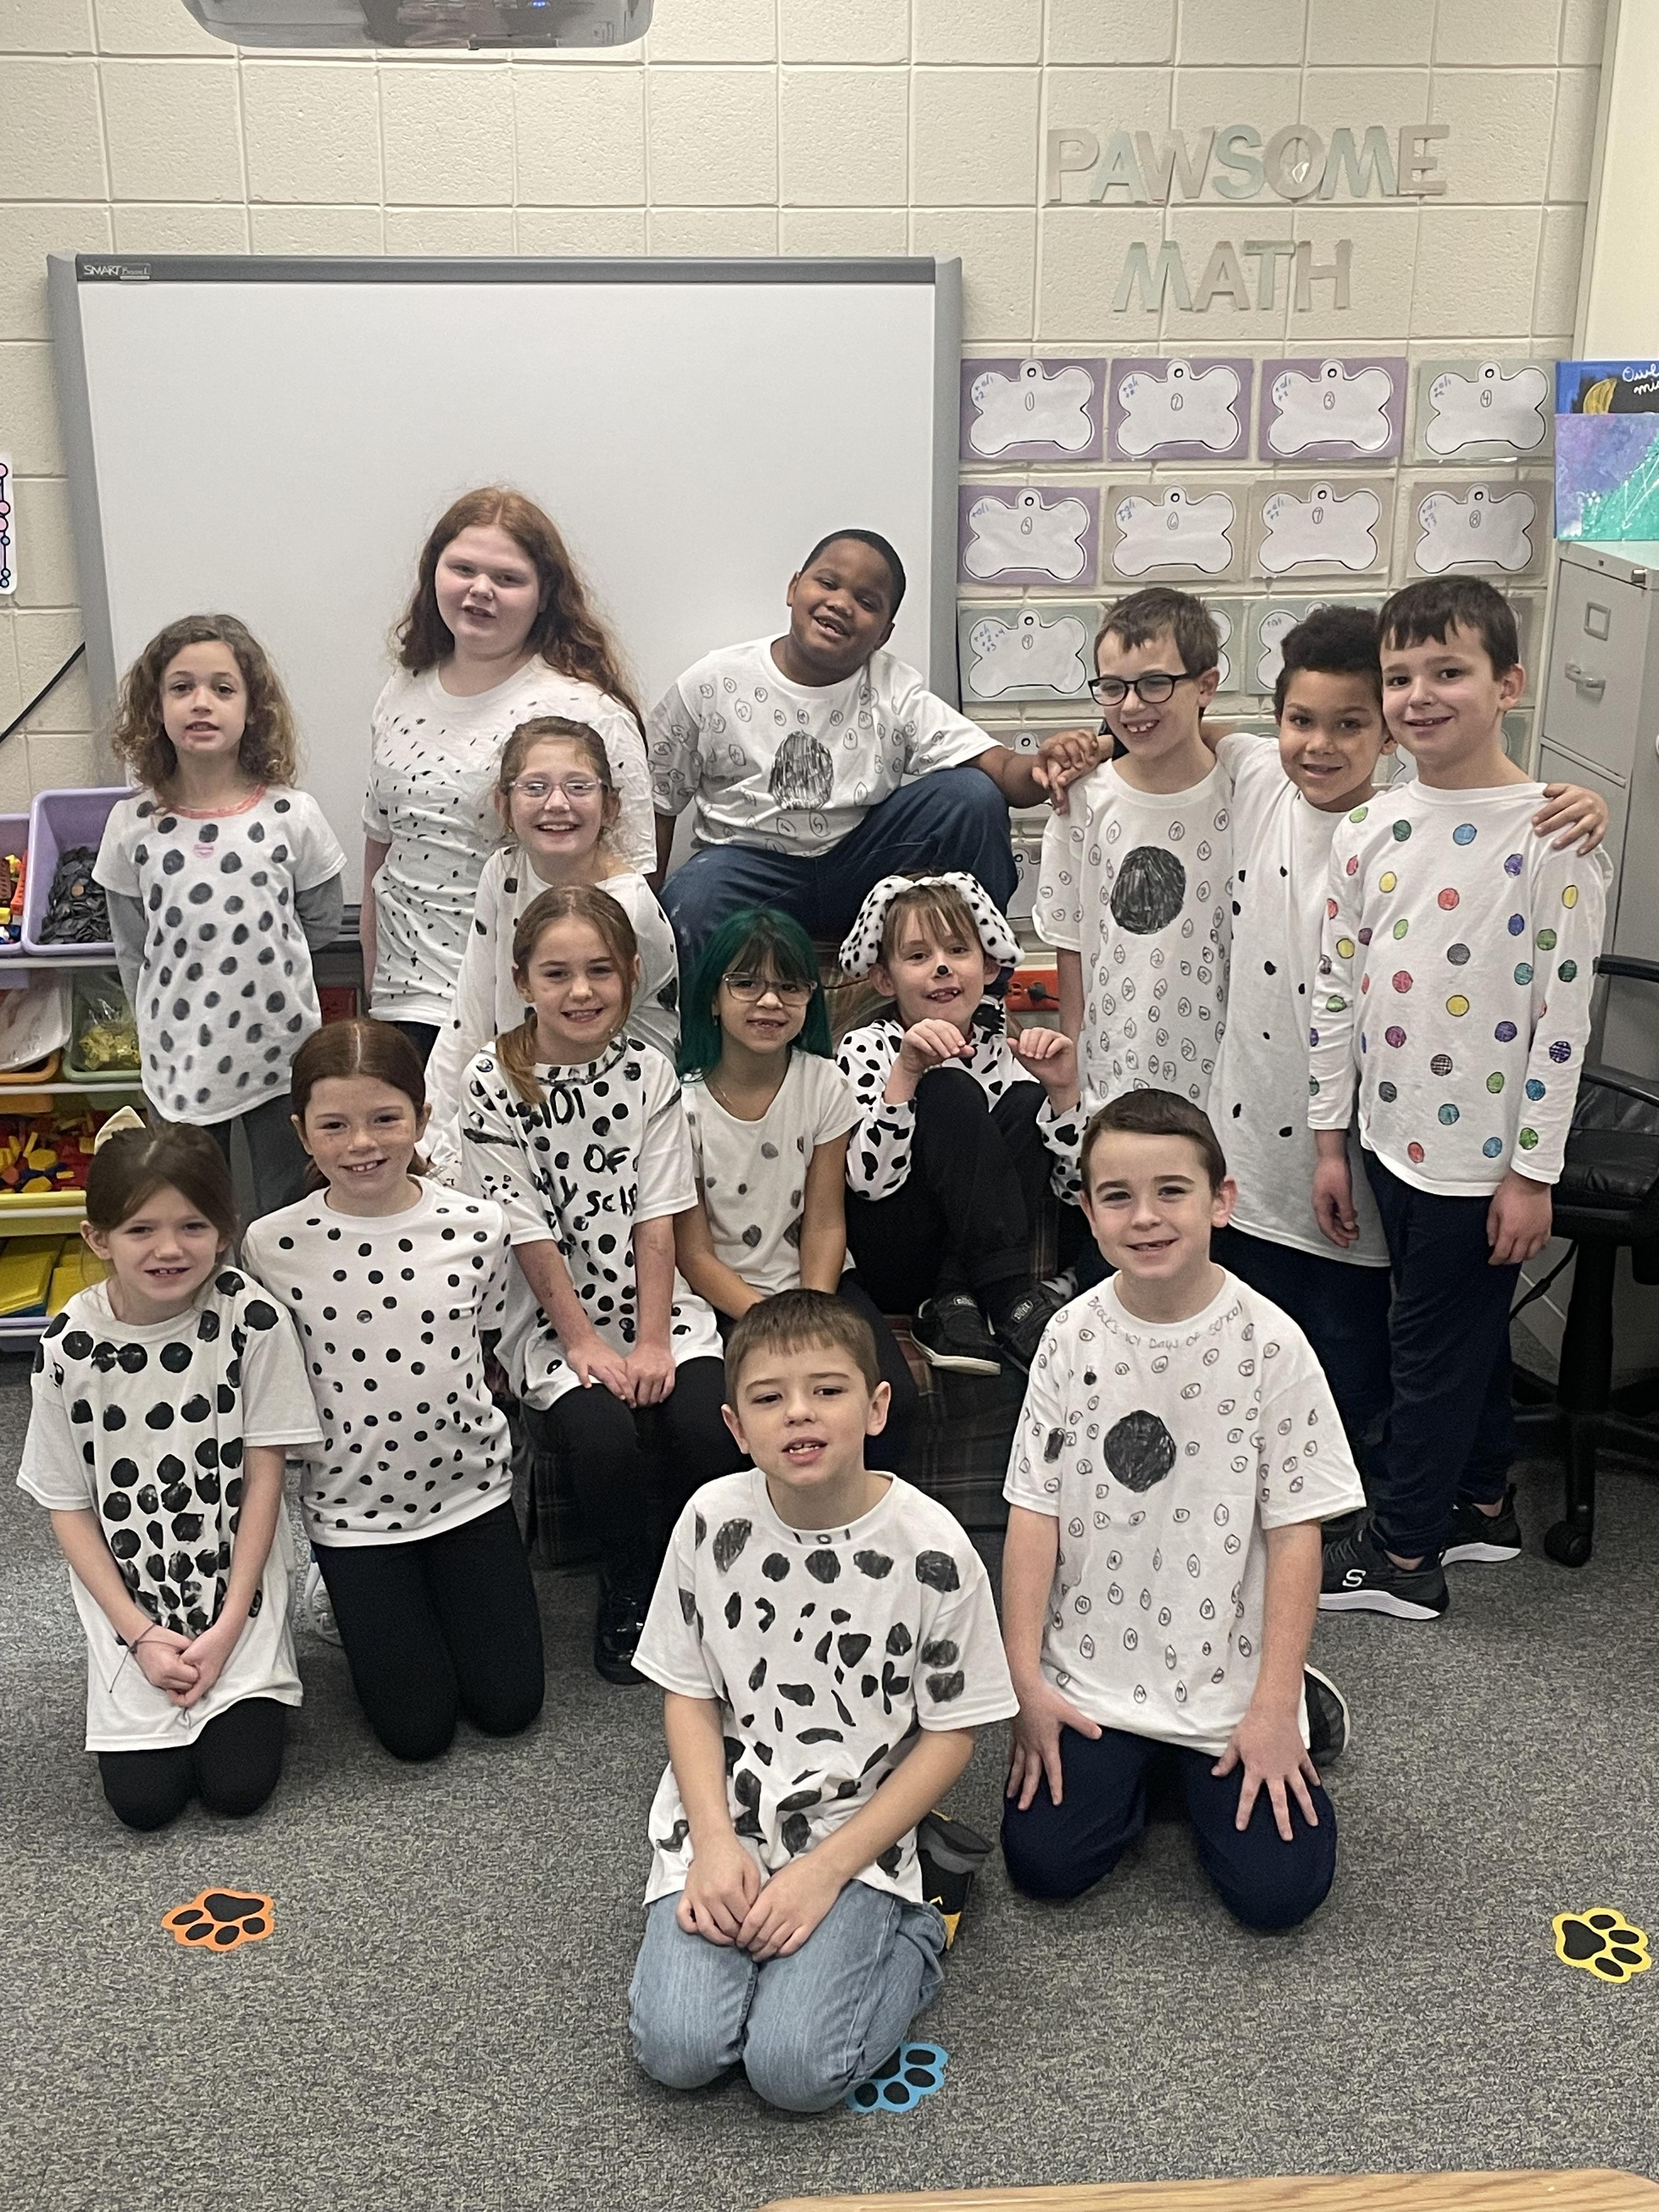 Mrs. Witek’s second-grade class at Trafford Elementary celebrated the 101st day of school with a dalmatian theme